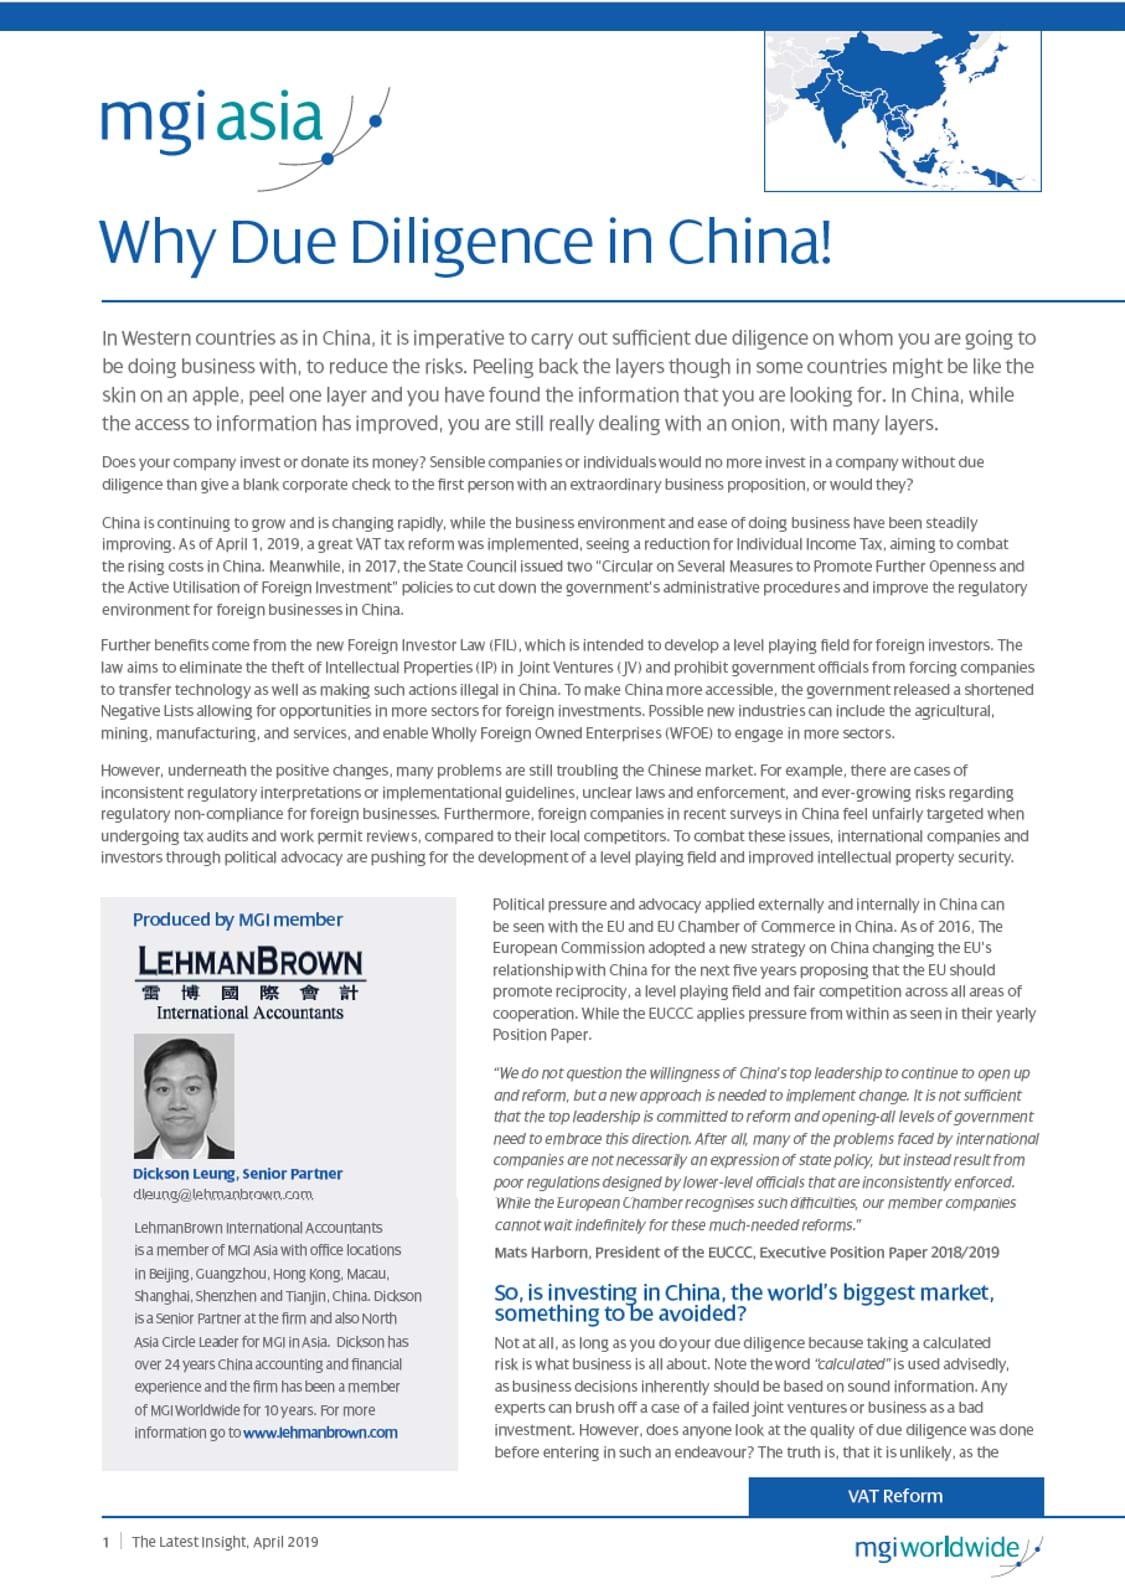 lehmanbrown_why-due-diligence-in-china.jpg